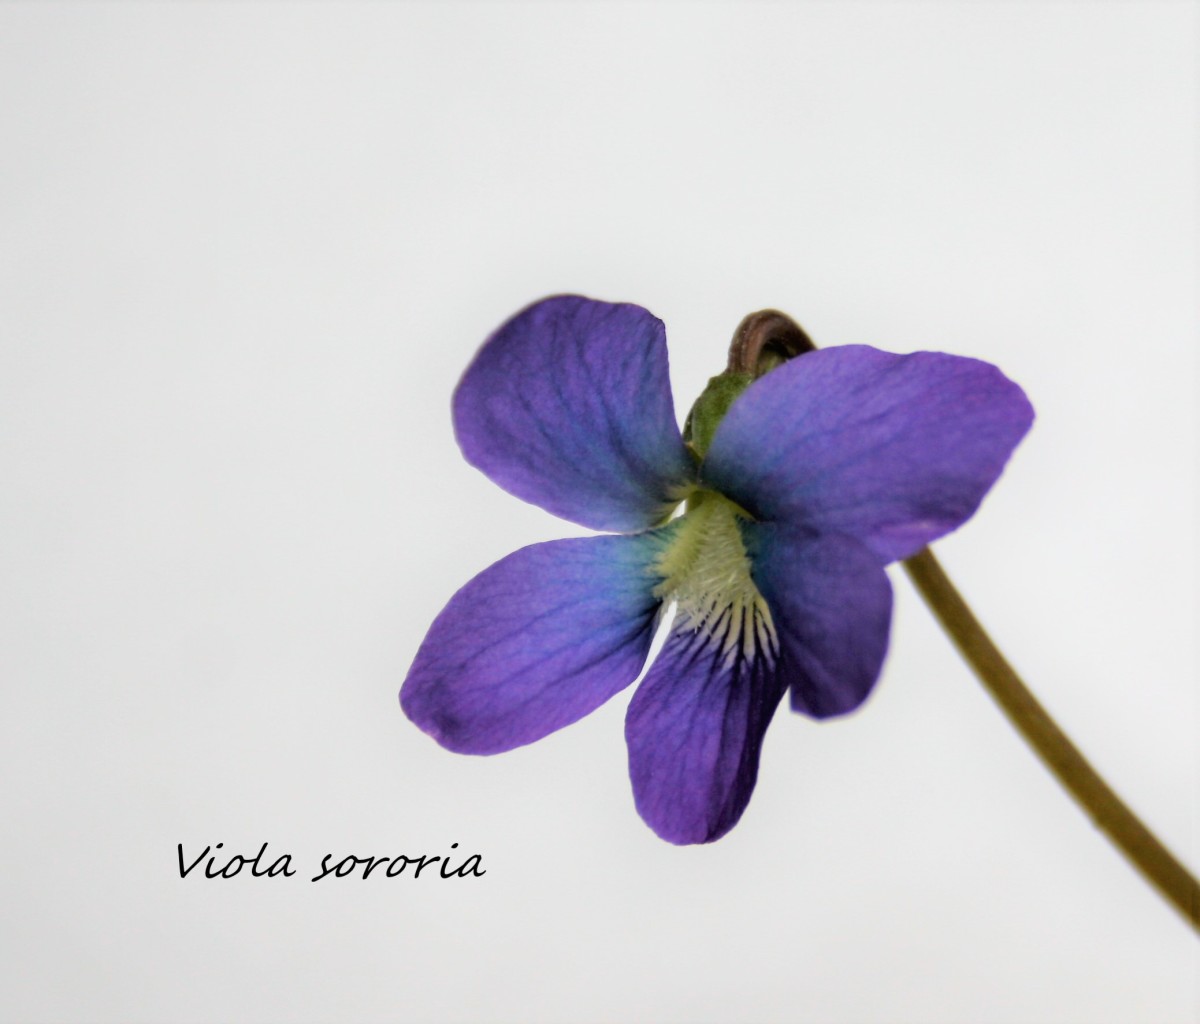 Also known as the common blue violet, Viola sororia is an edible flower that produces sweet scents.